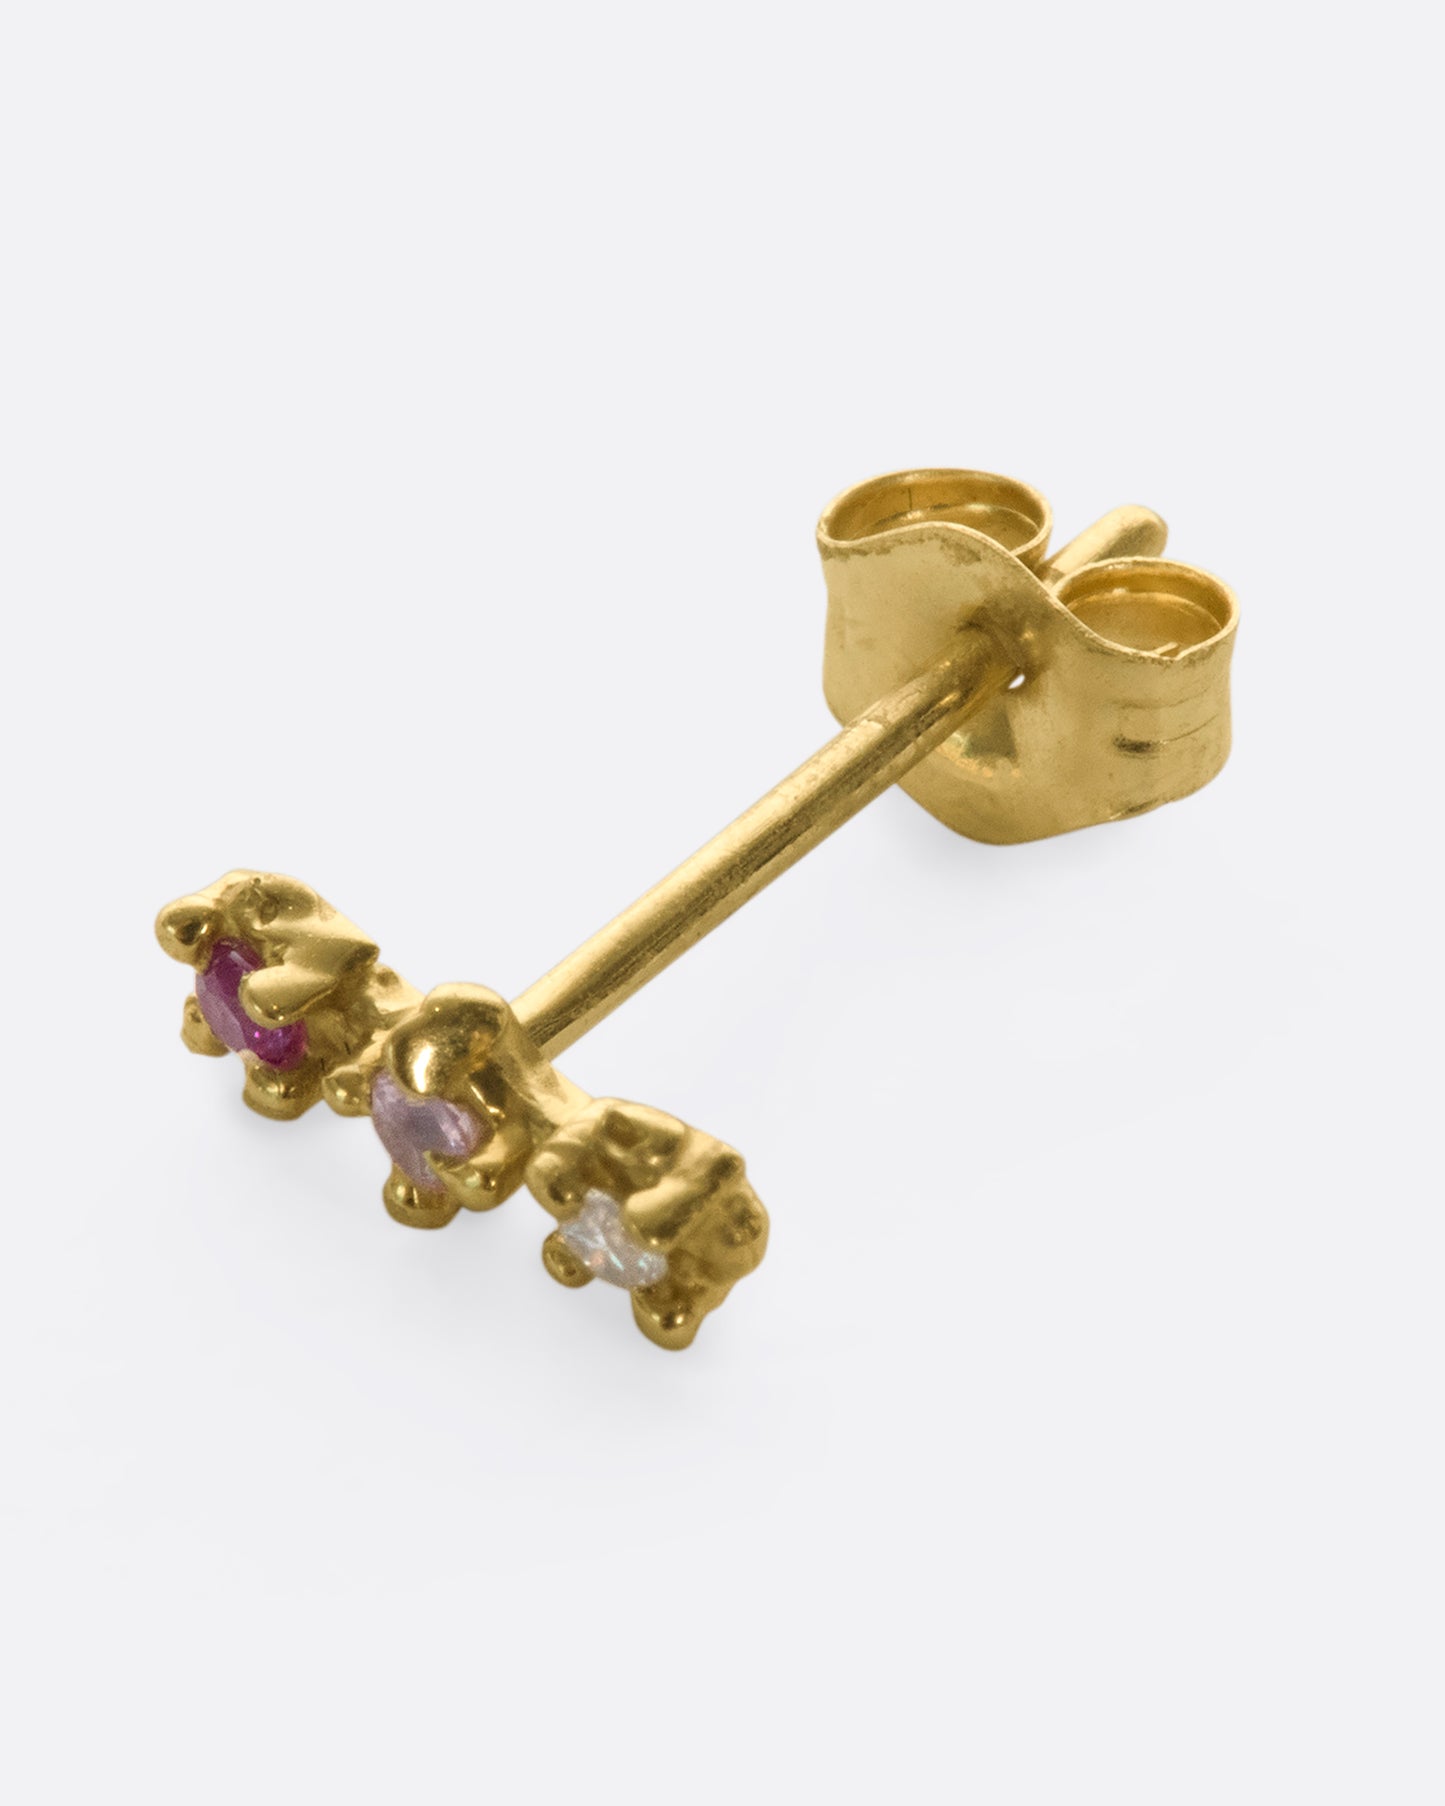 A 14k gold bar stud embellished with a ruby, pink sapphire, and diamond